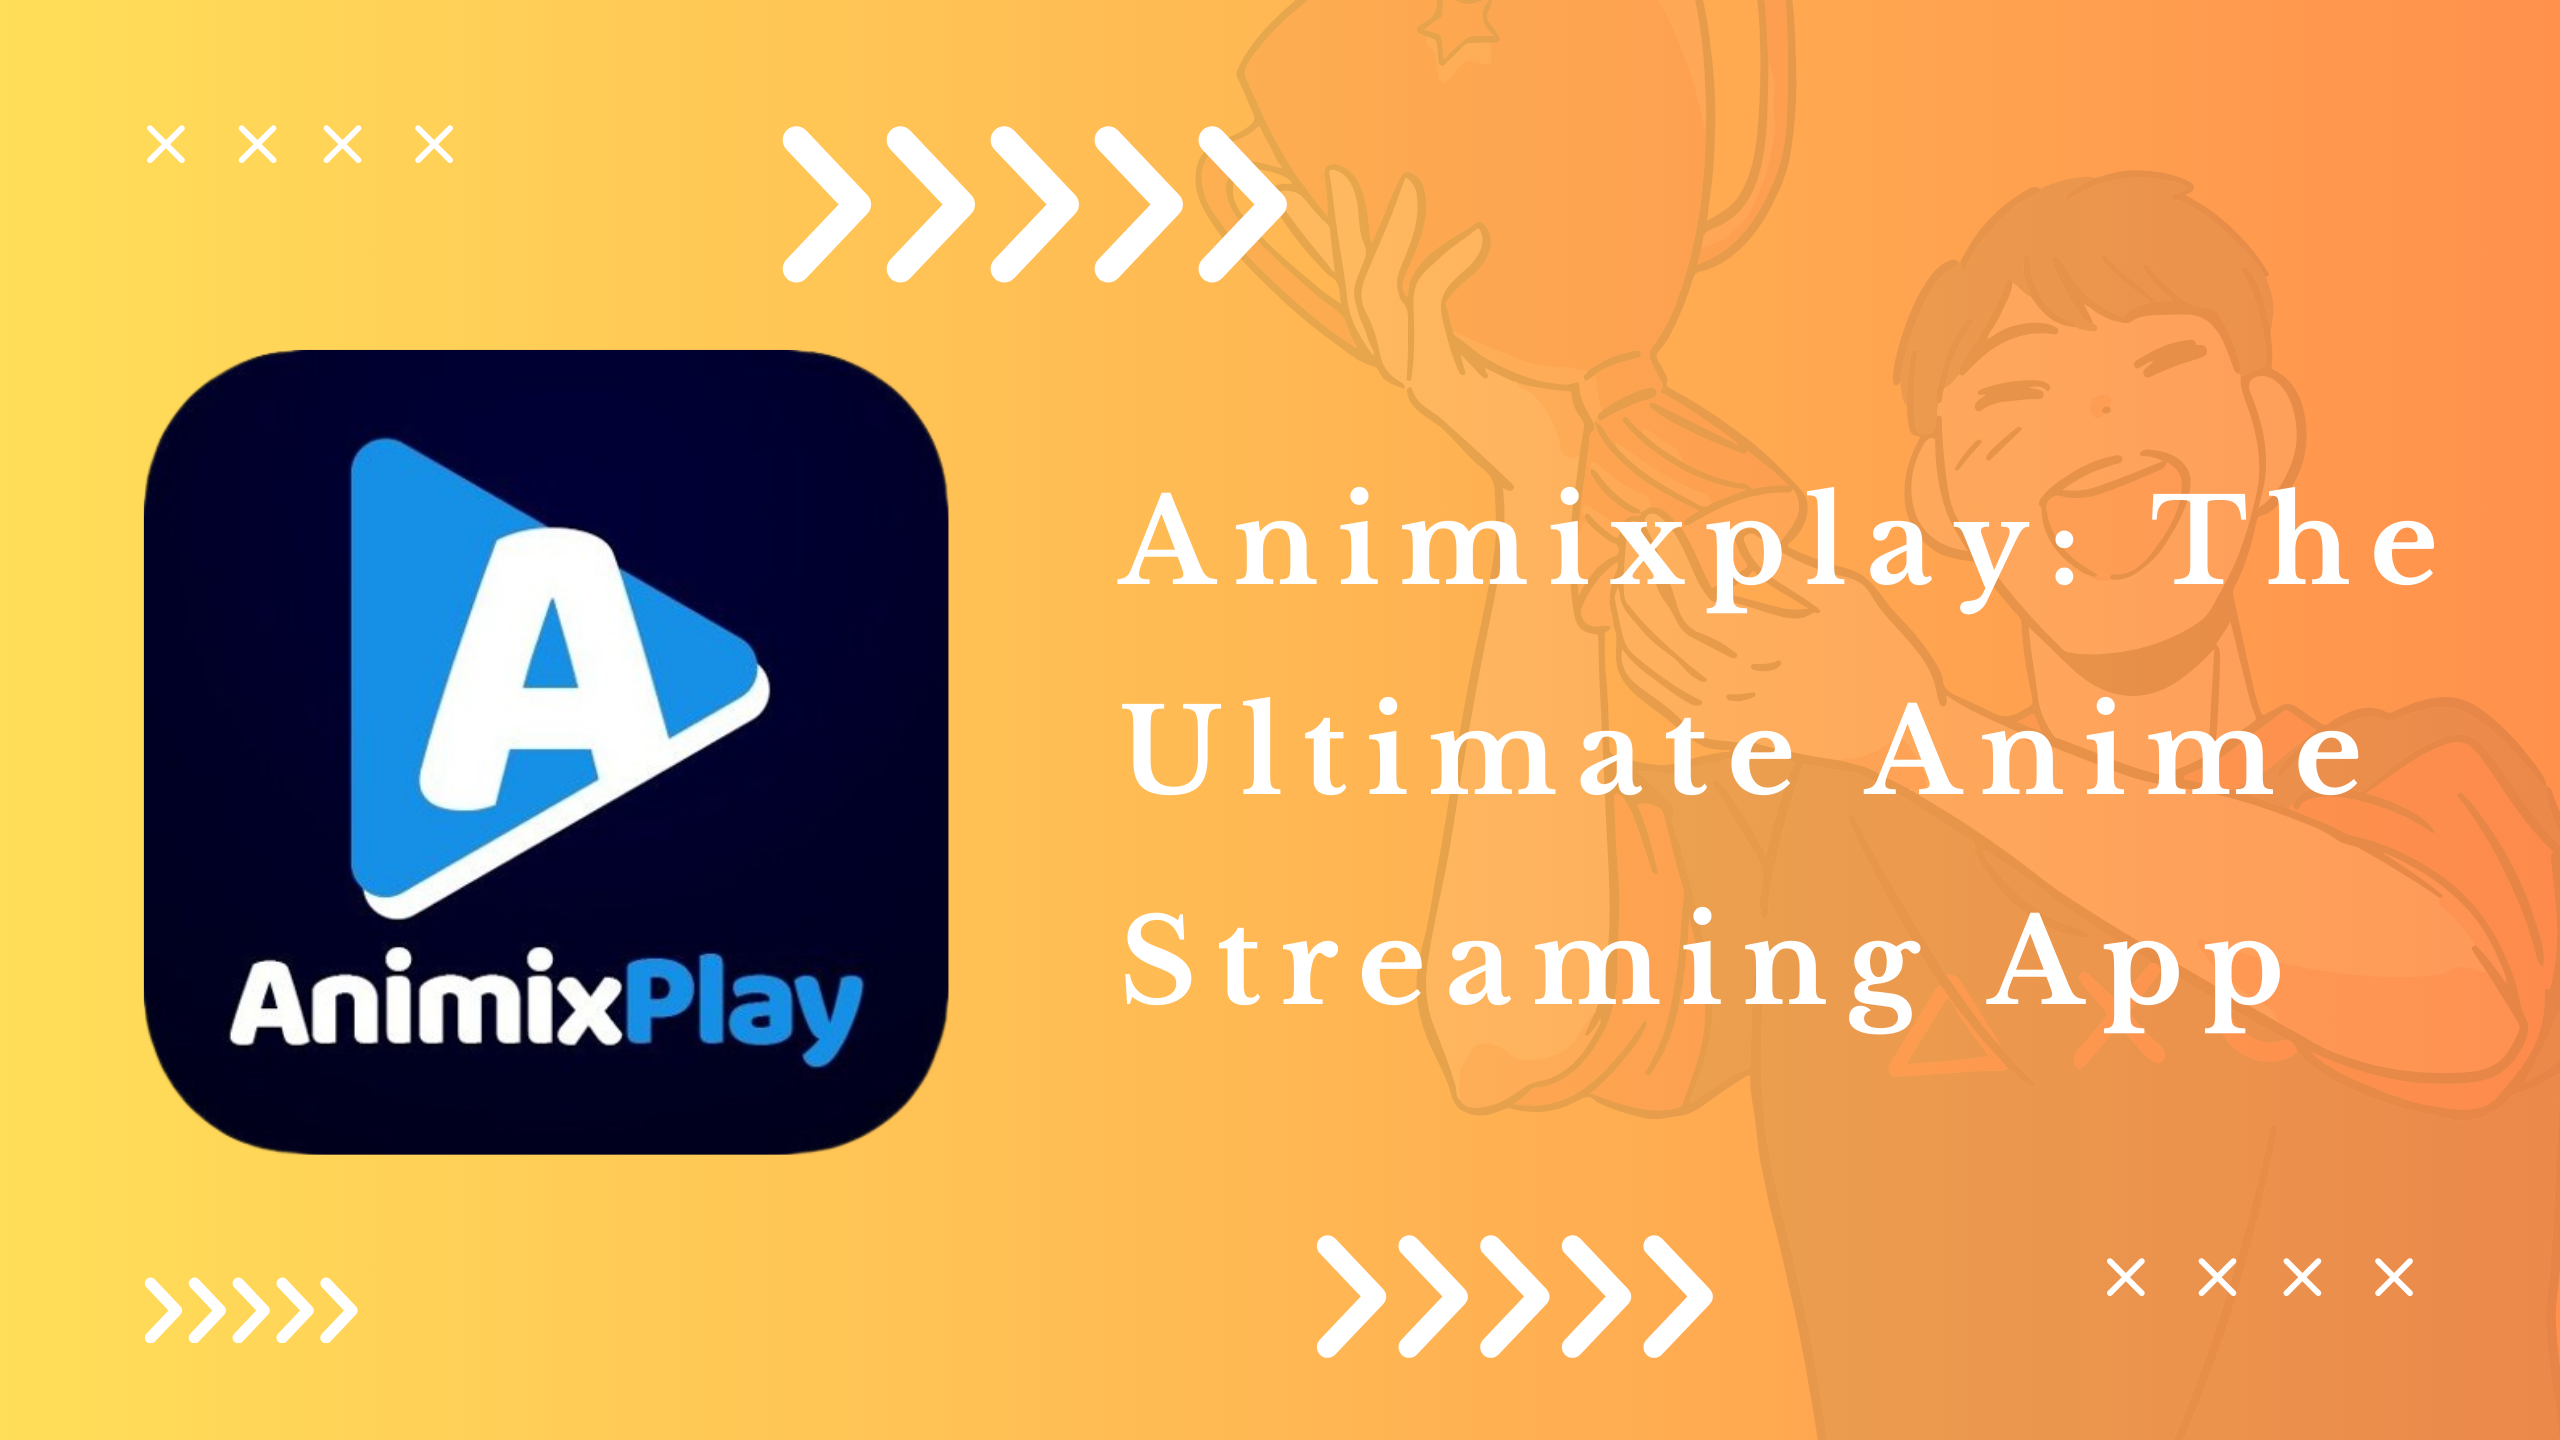 Animixplay: The Ultimate Anime Streaming App